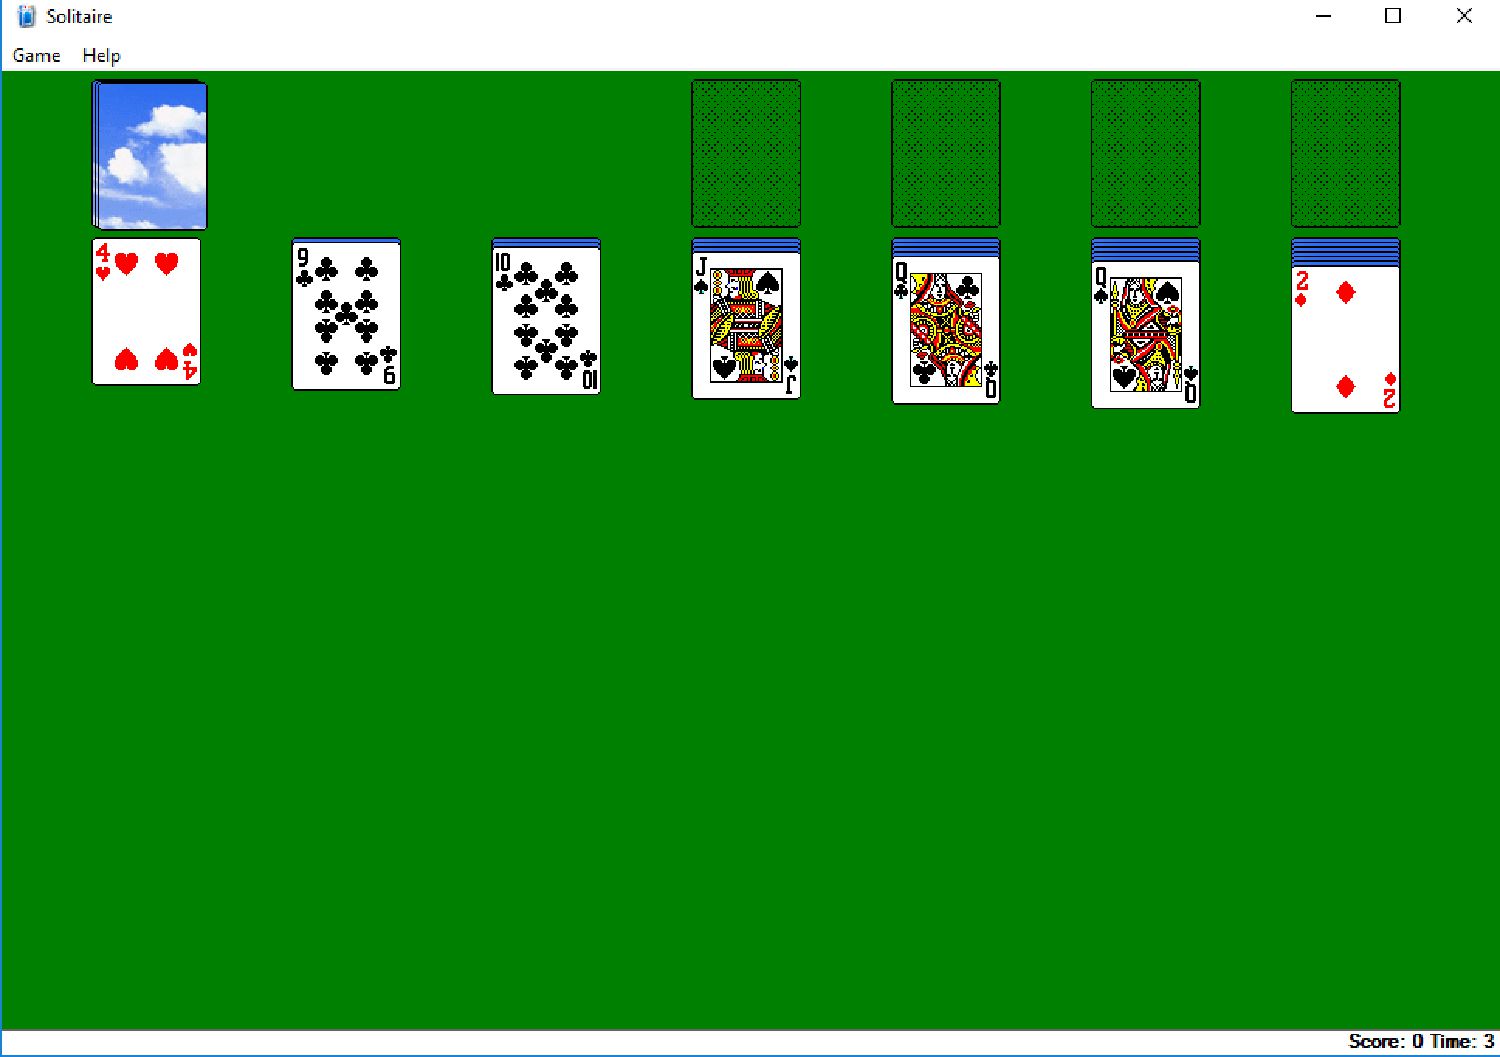 Get the classic free Solitaire games for Windows - Microsoft Support